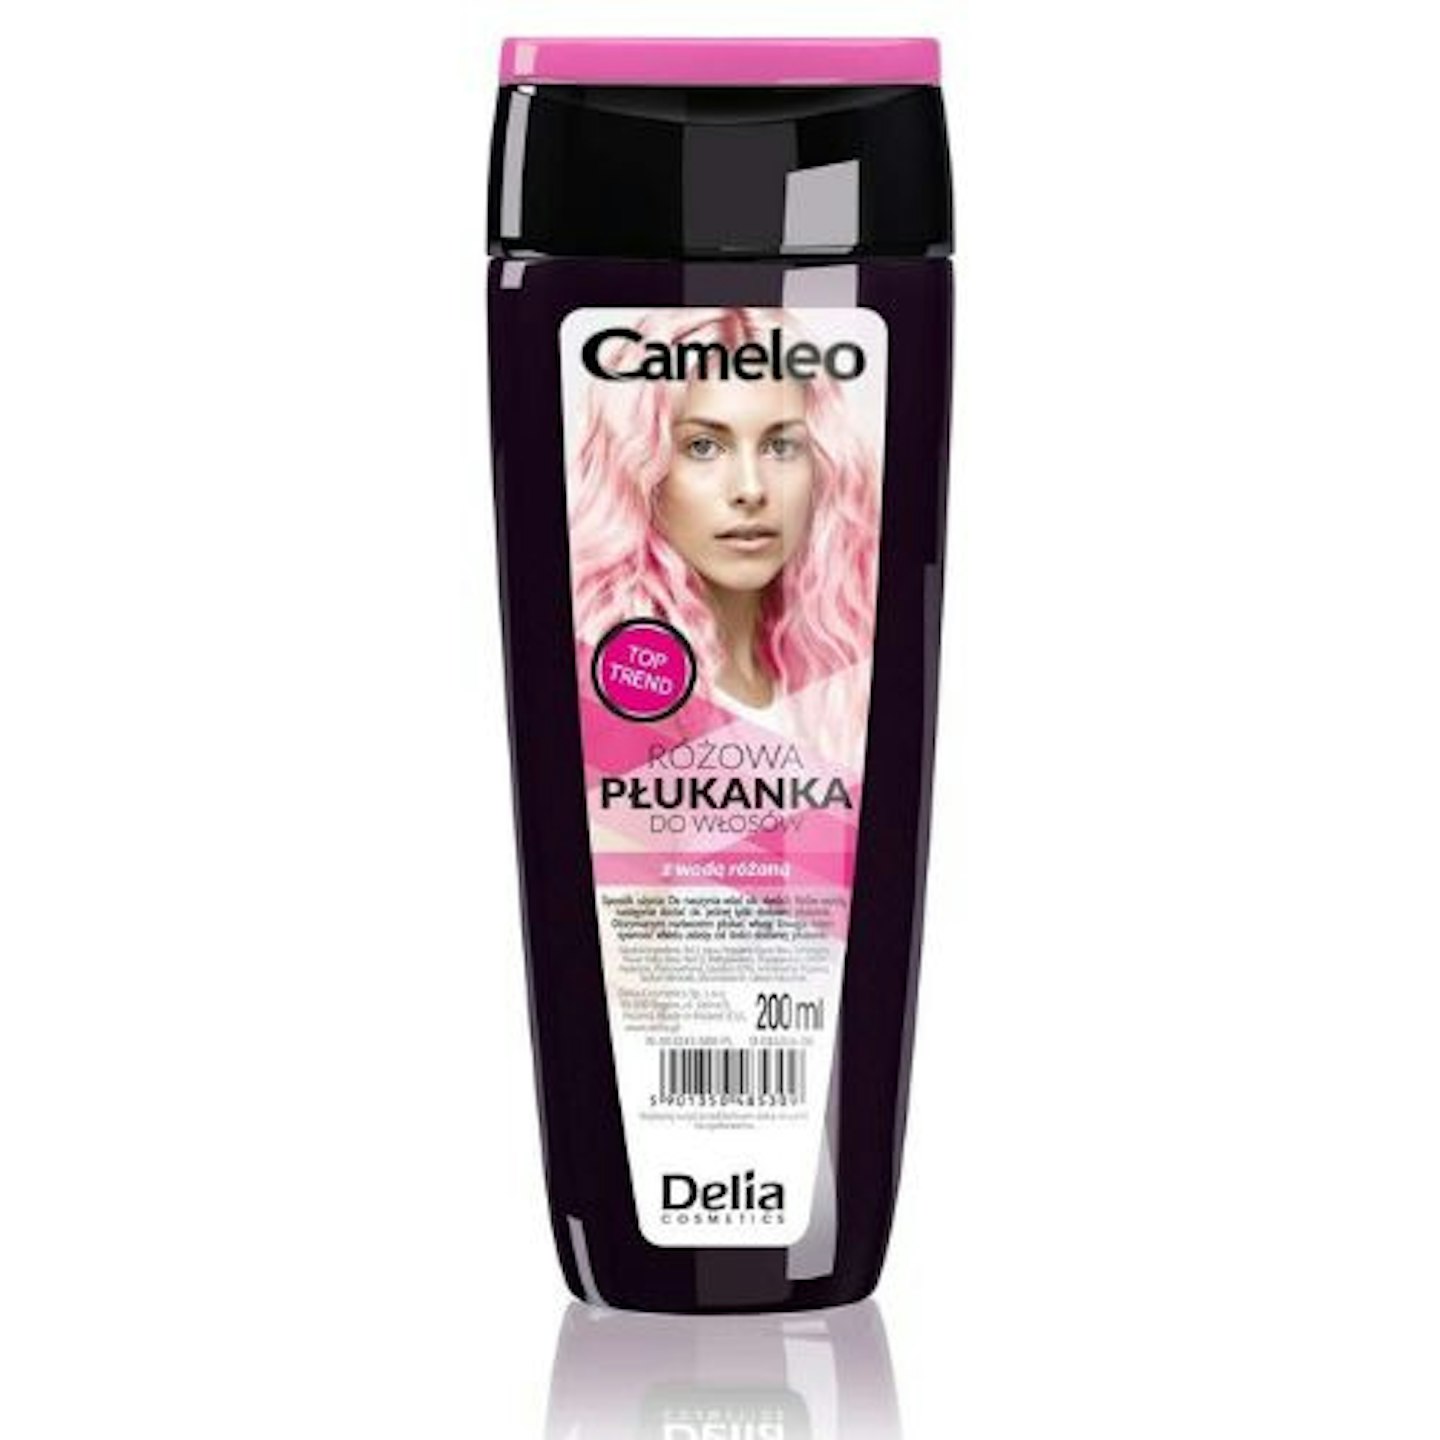 Cameleo Pink Hair Toner with Rose Water